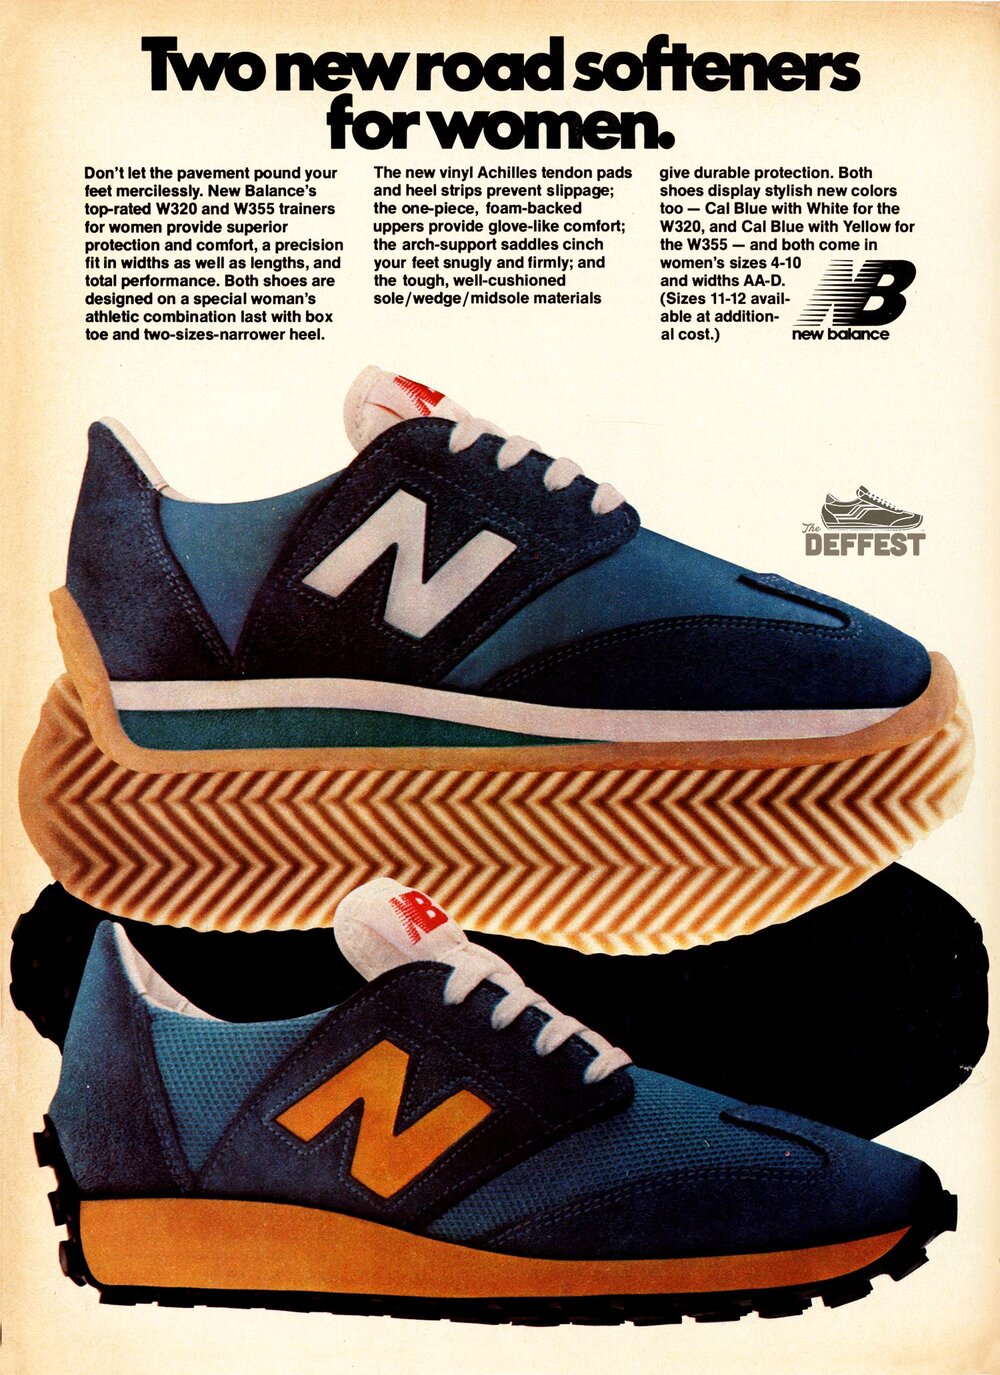 New Balance W320 — The Deffest®. A vintage and retro sneaker blog ...